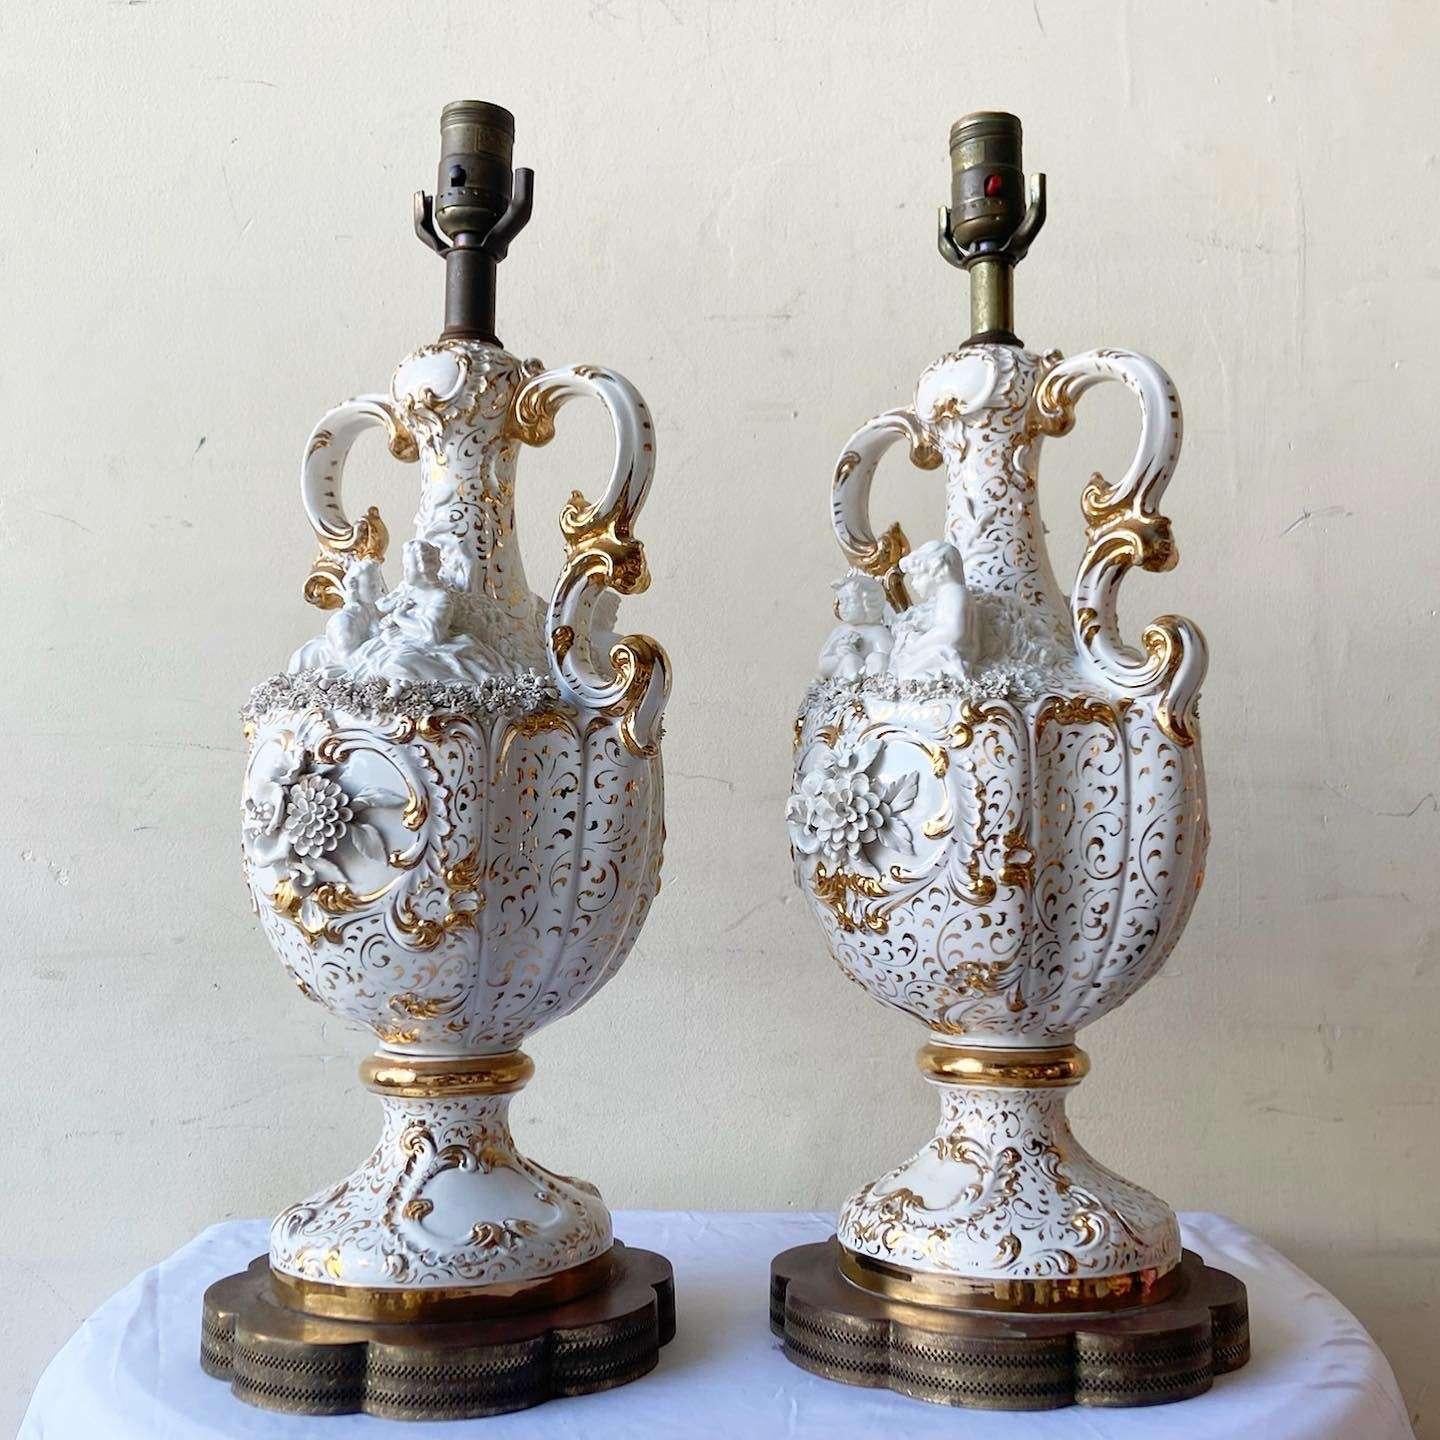 Incredible pair of ornate vintage table lamps. Each lamp feature an intricate design of flowers and cherubs of white and gold.
